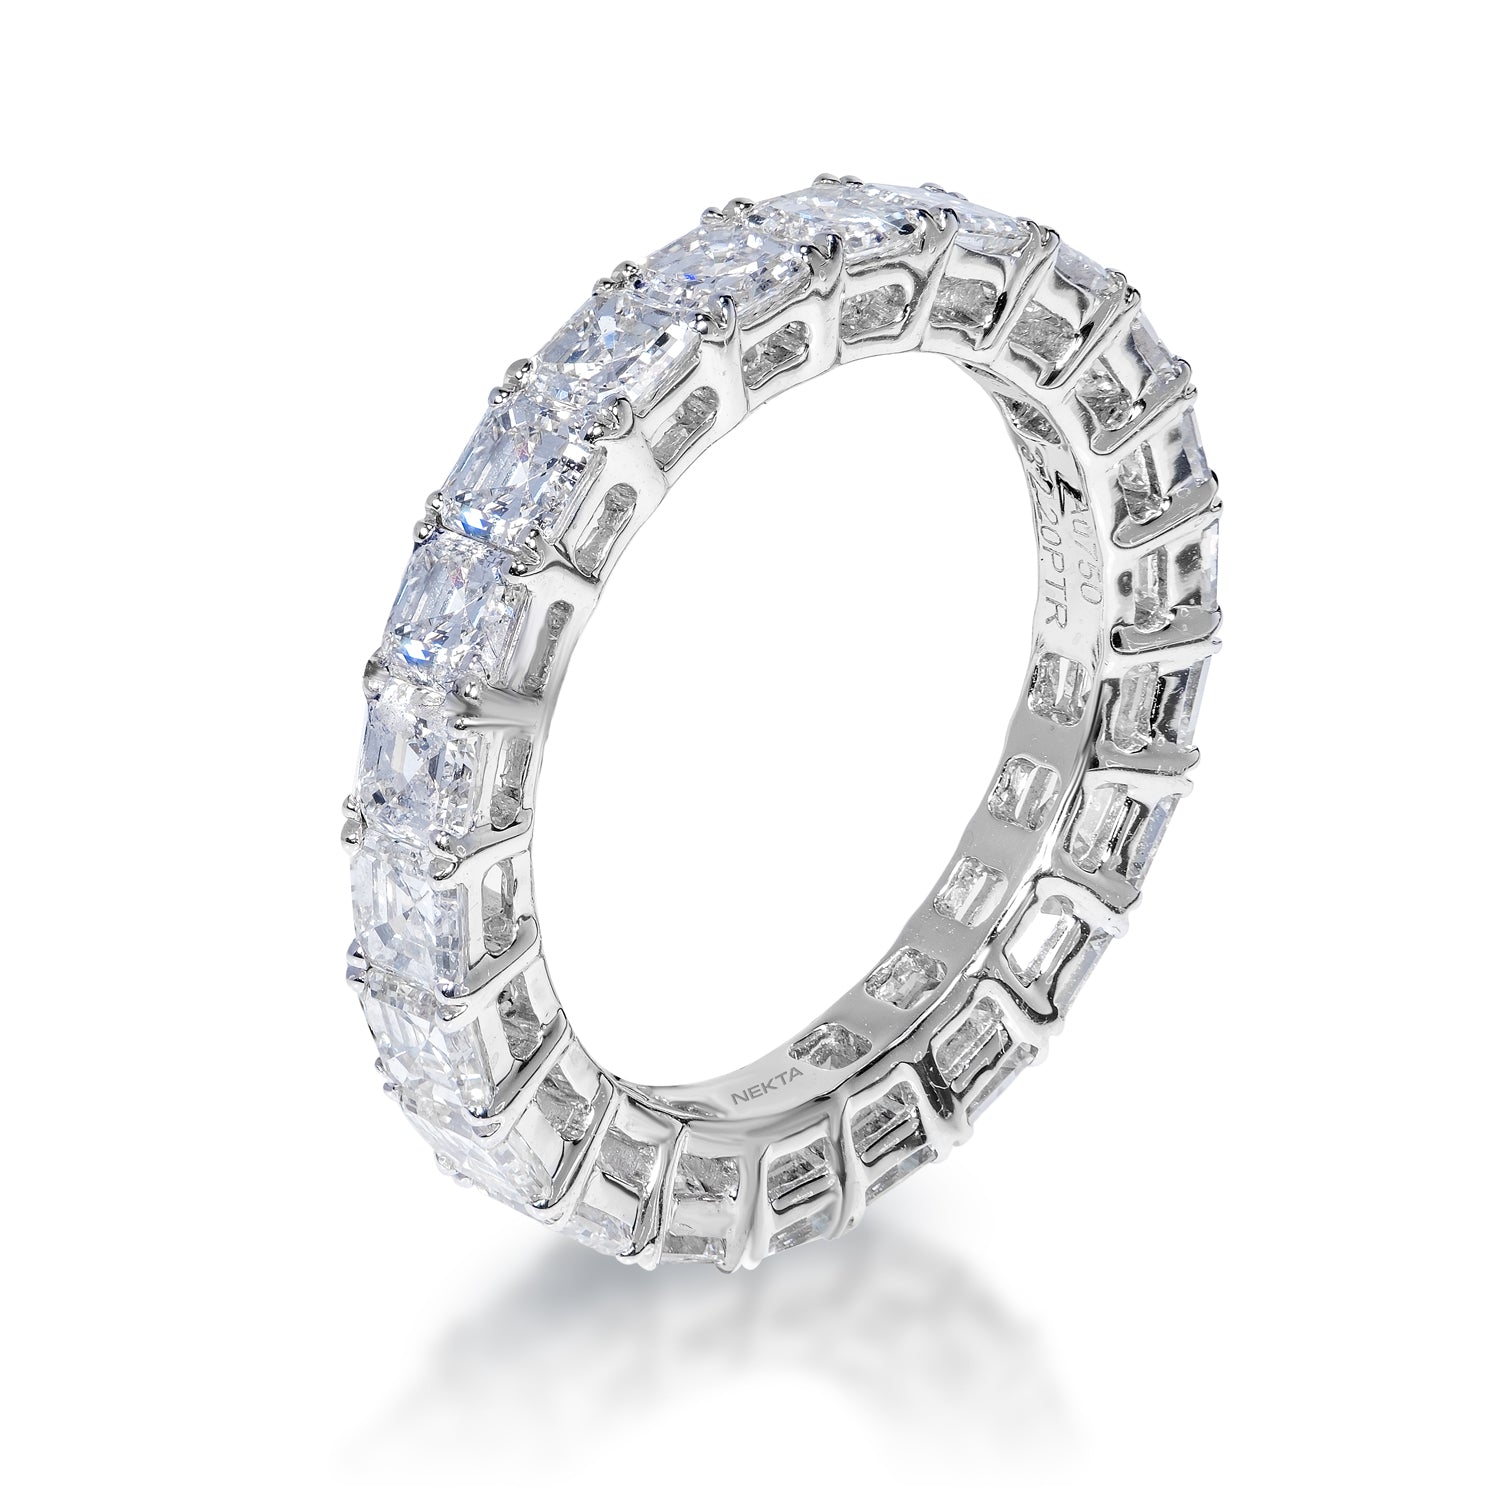 Anahi 4 Carat Asscher Cut Diamond Eternity Band in 18k White Gold Shared Prong Side View